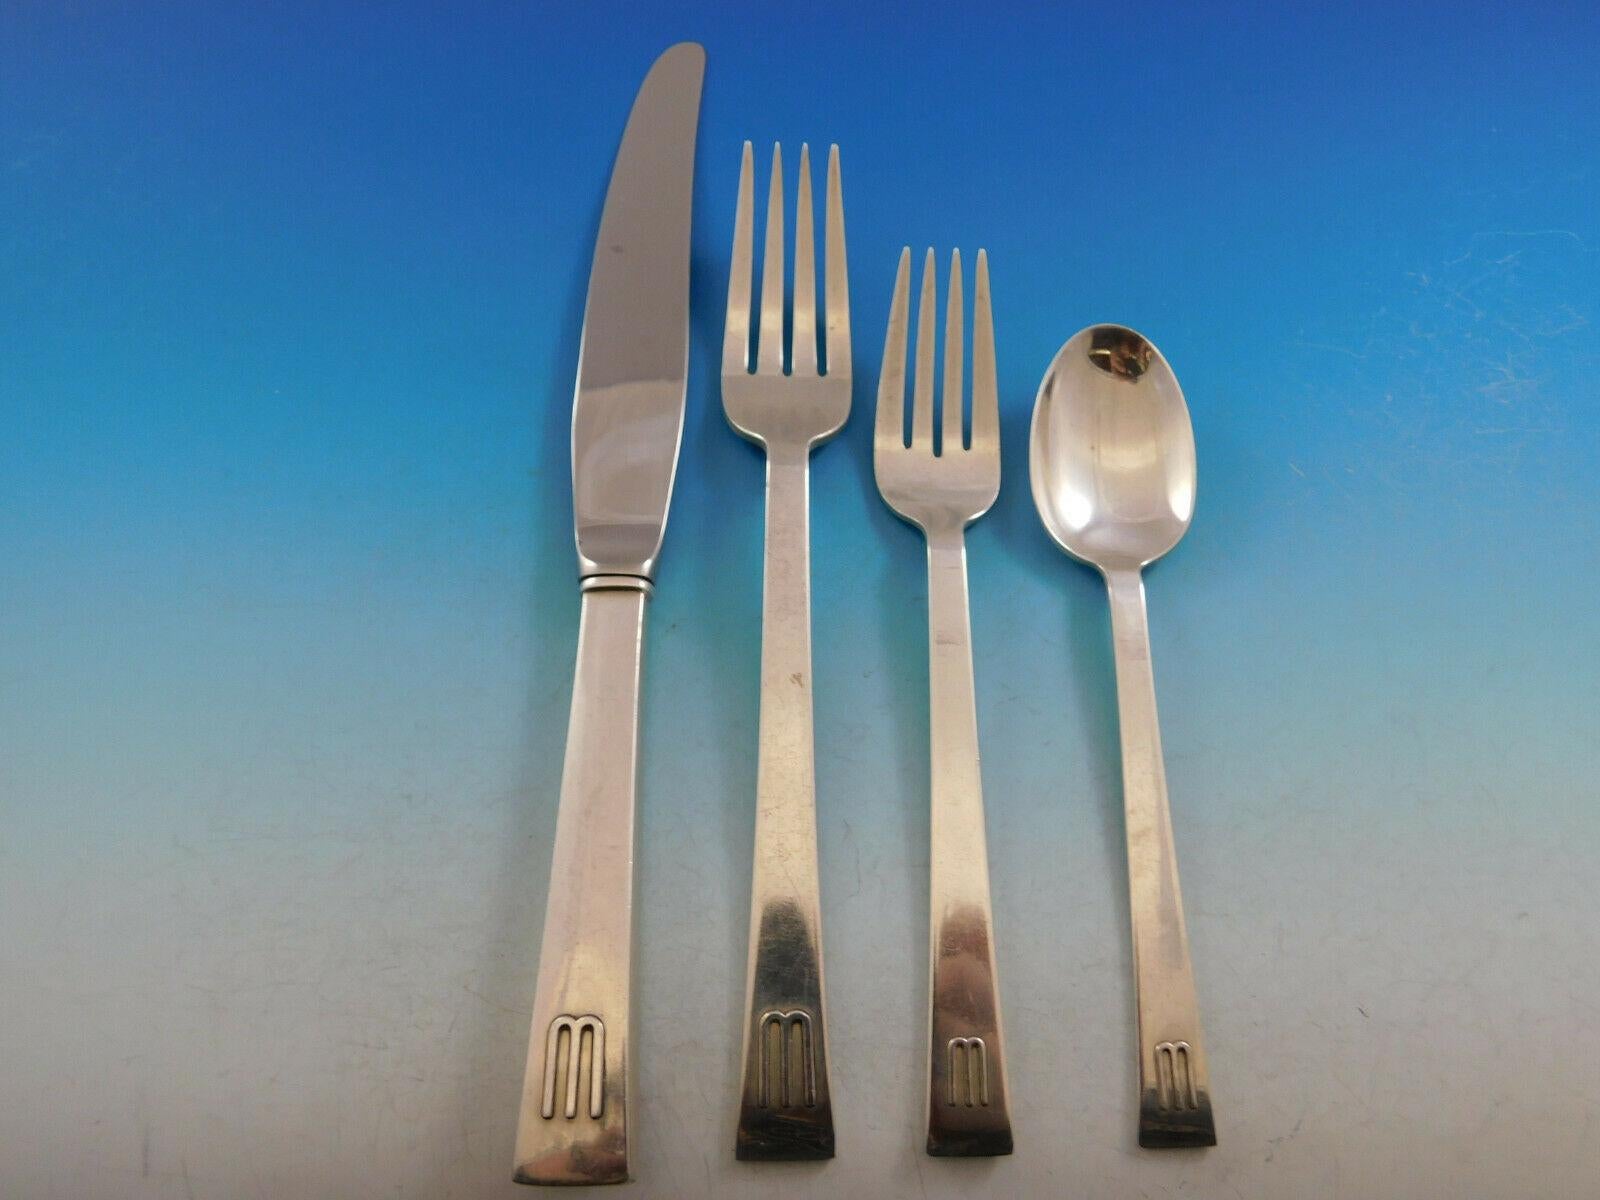 Monumental continental by international dinner and lunch size sterling silver flatware set - 137 pieces with applied 